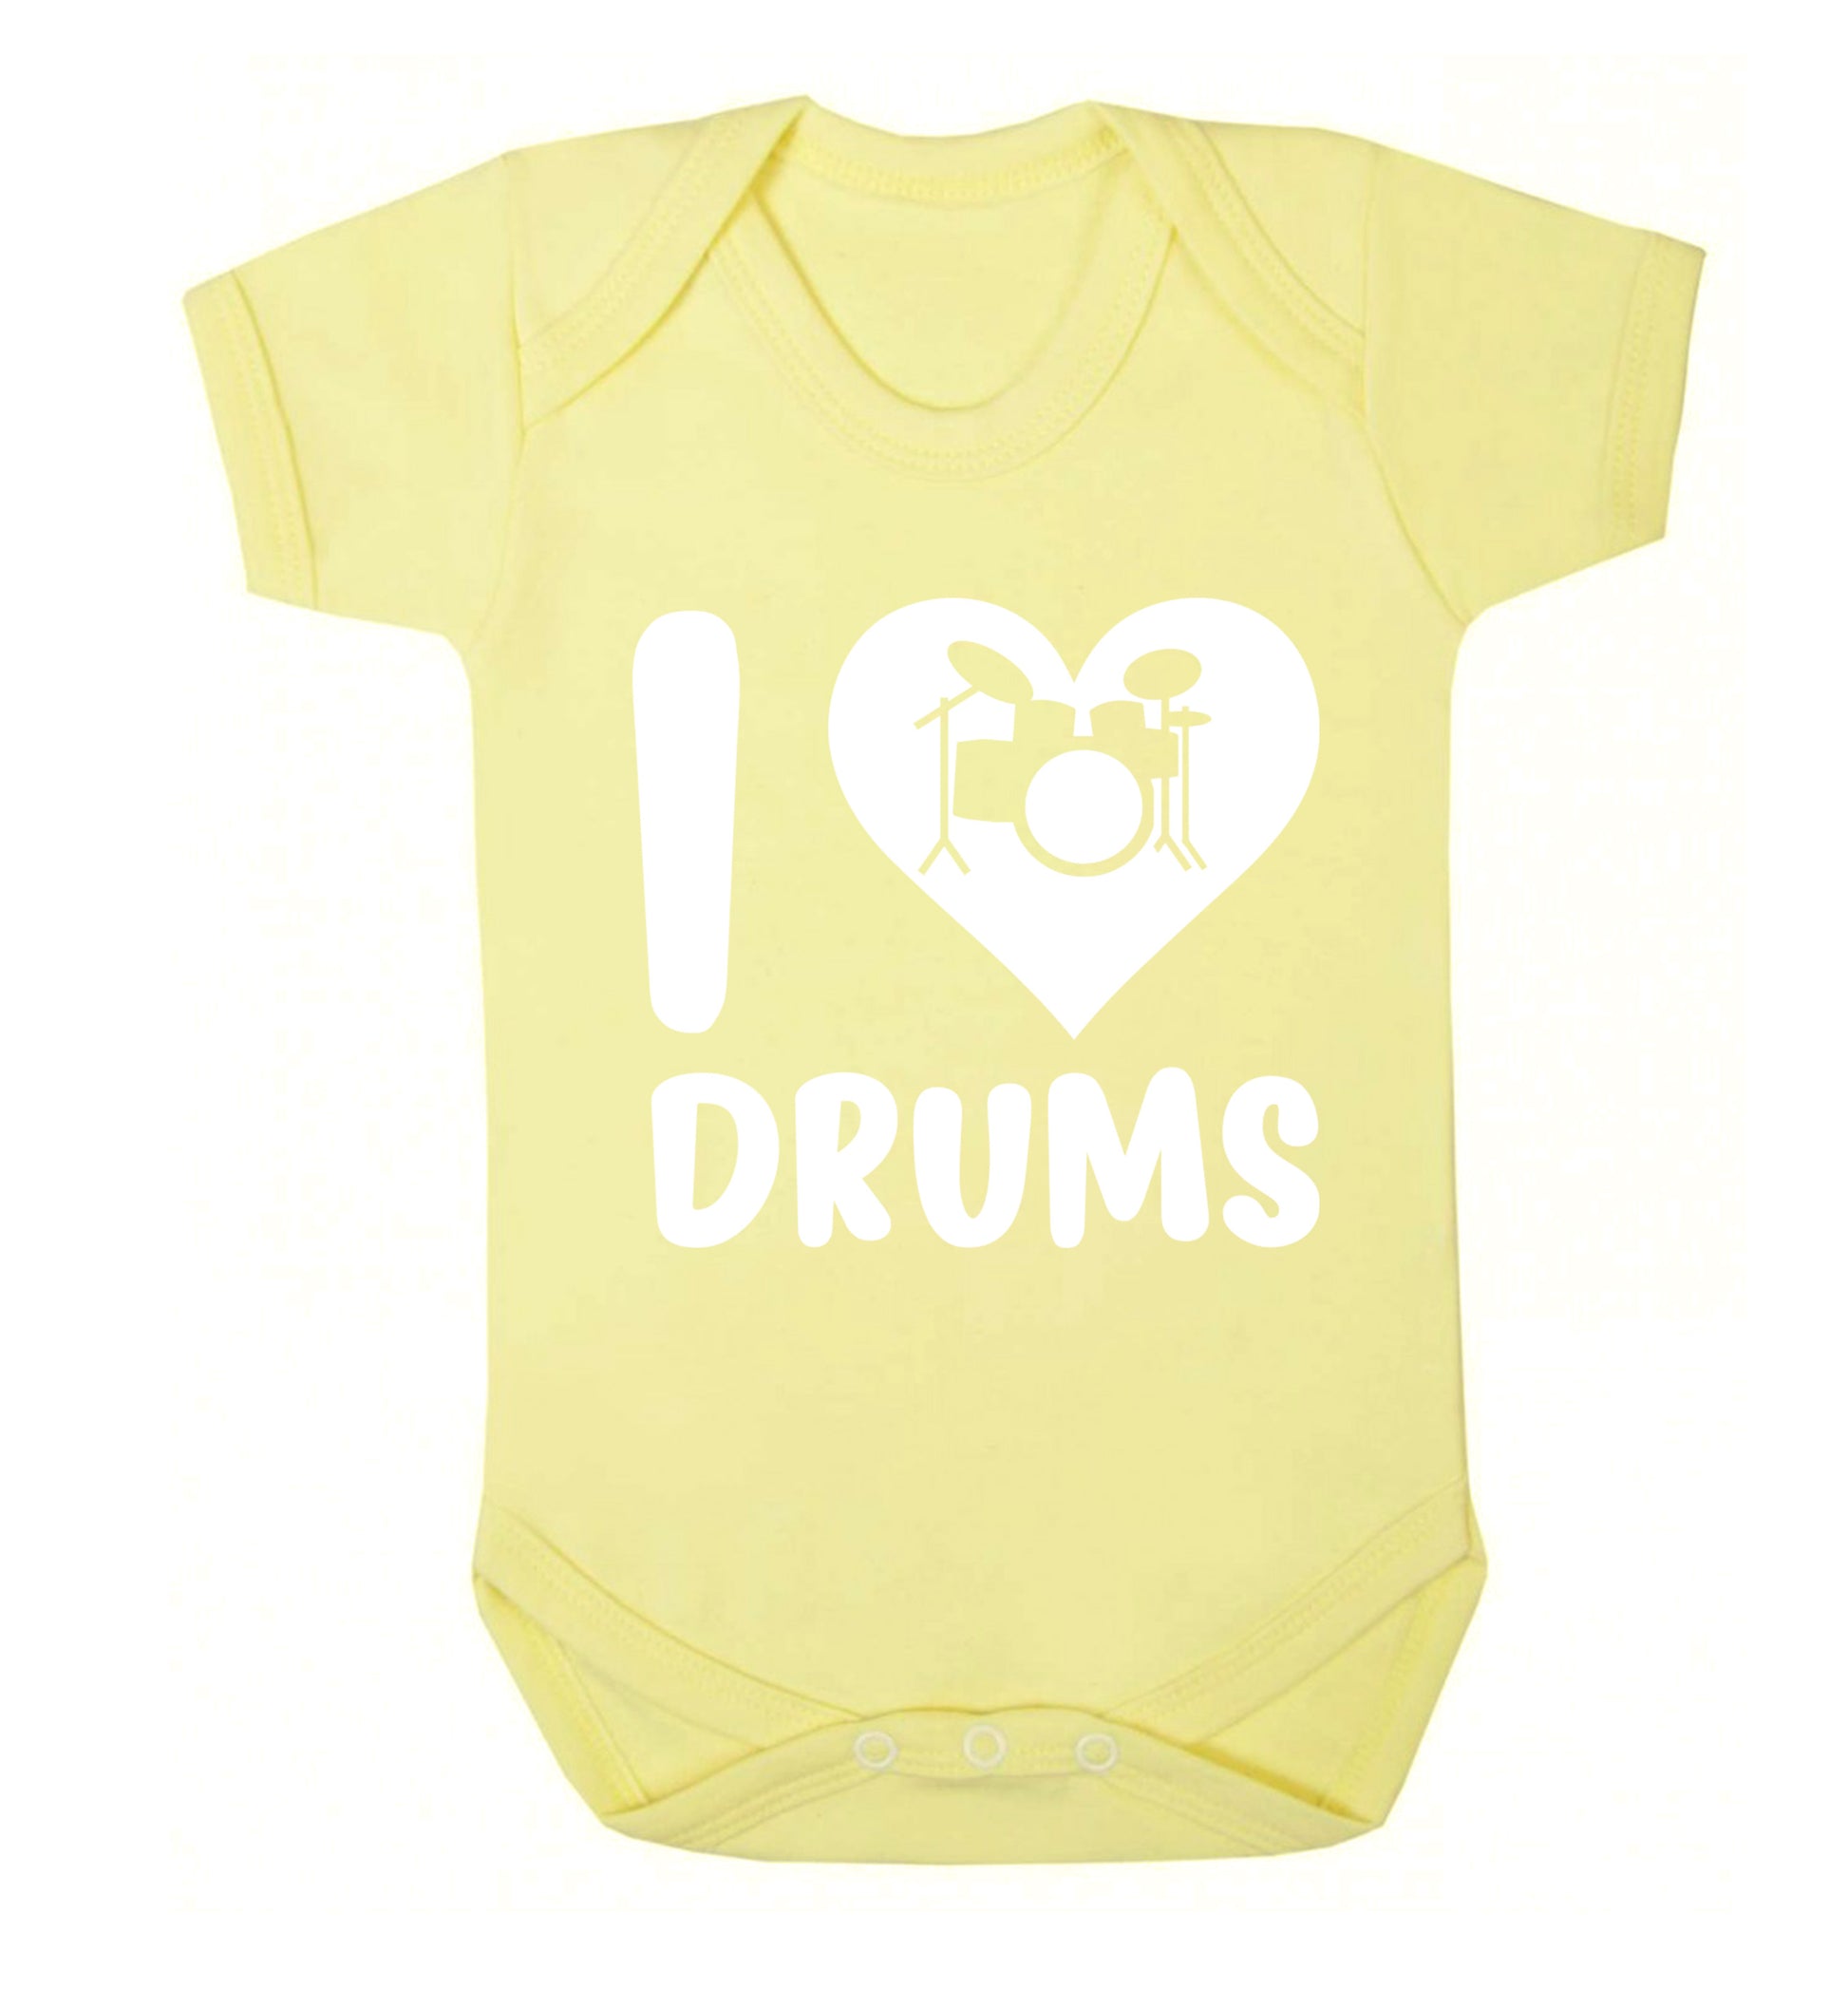 I love drums Baby Vest pale yellow 18-24 months